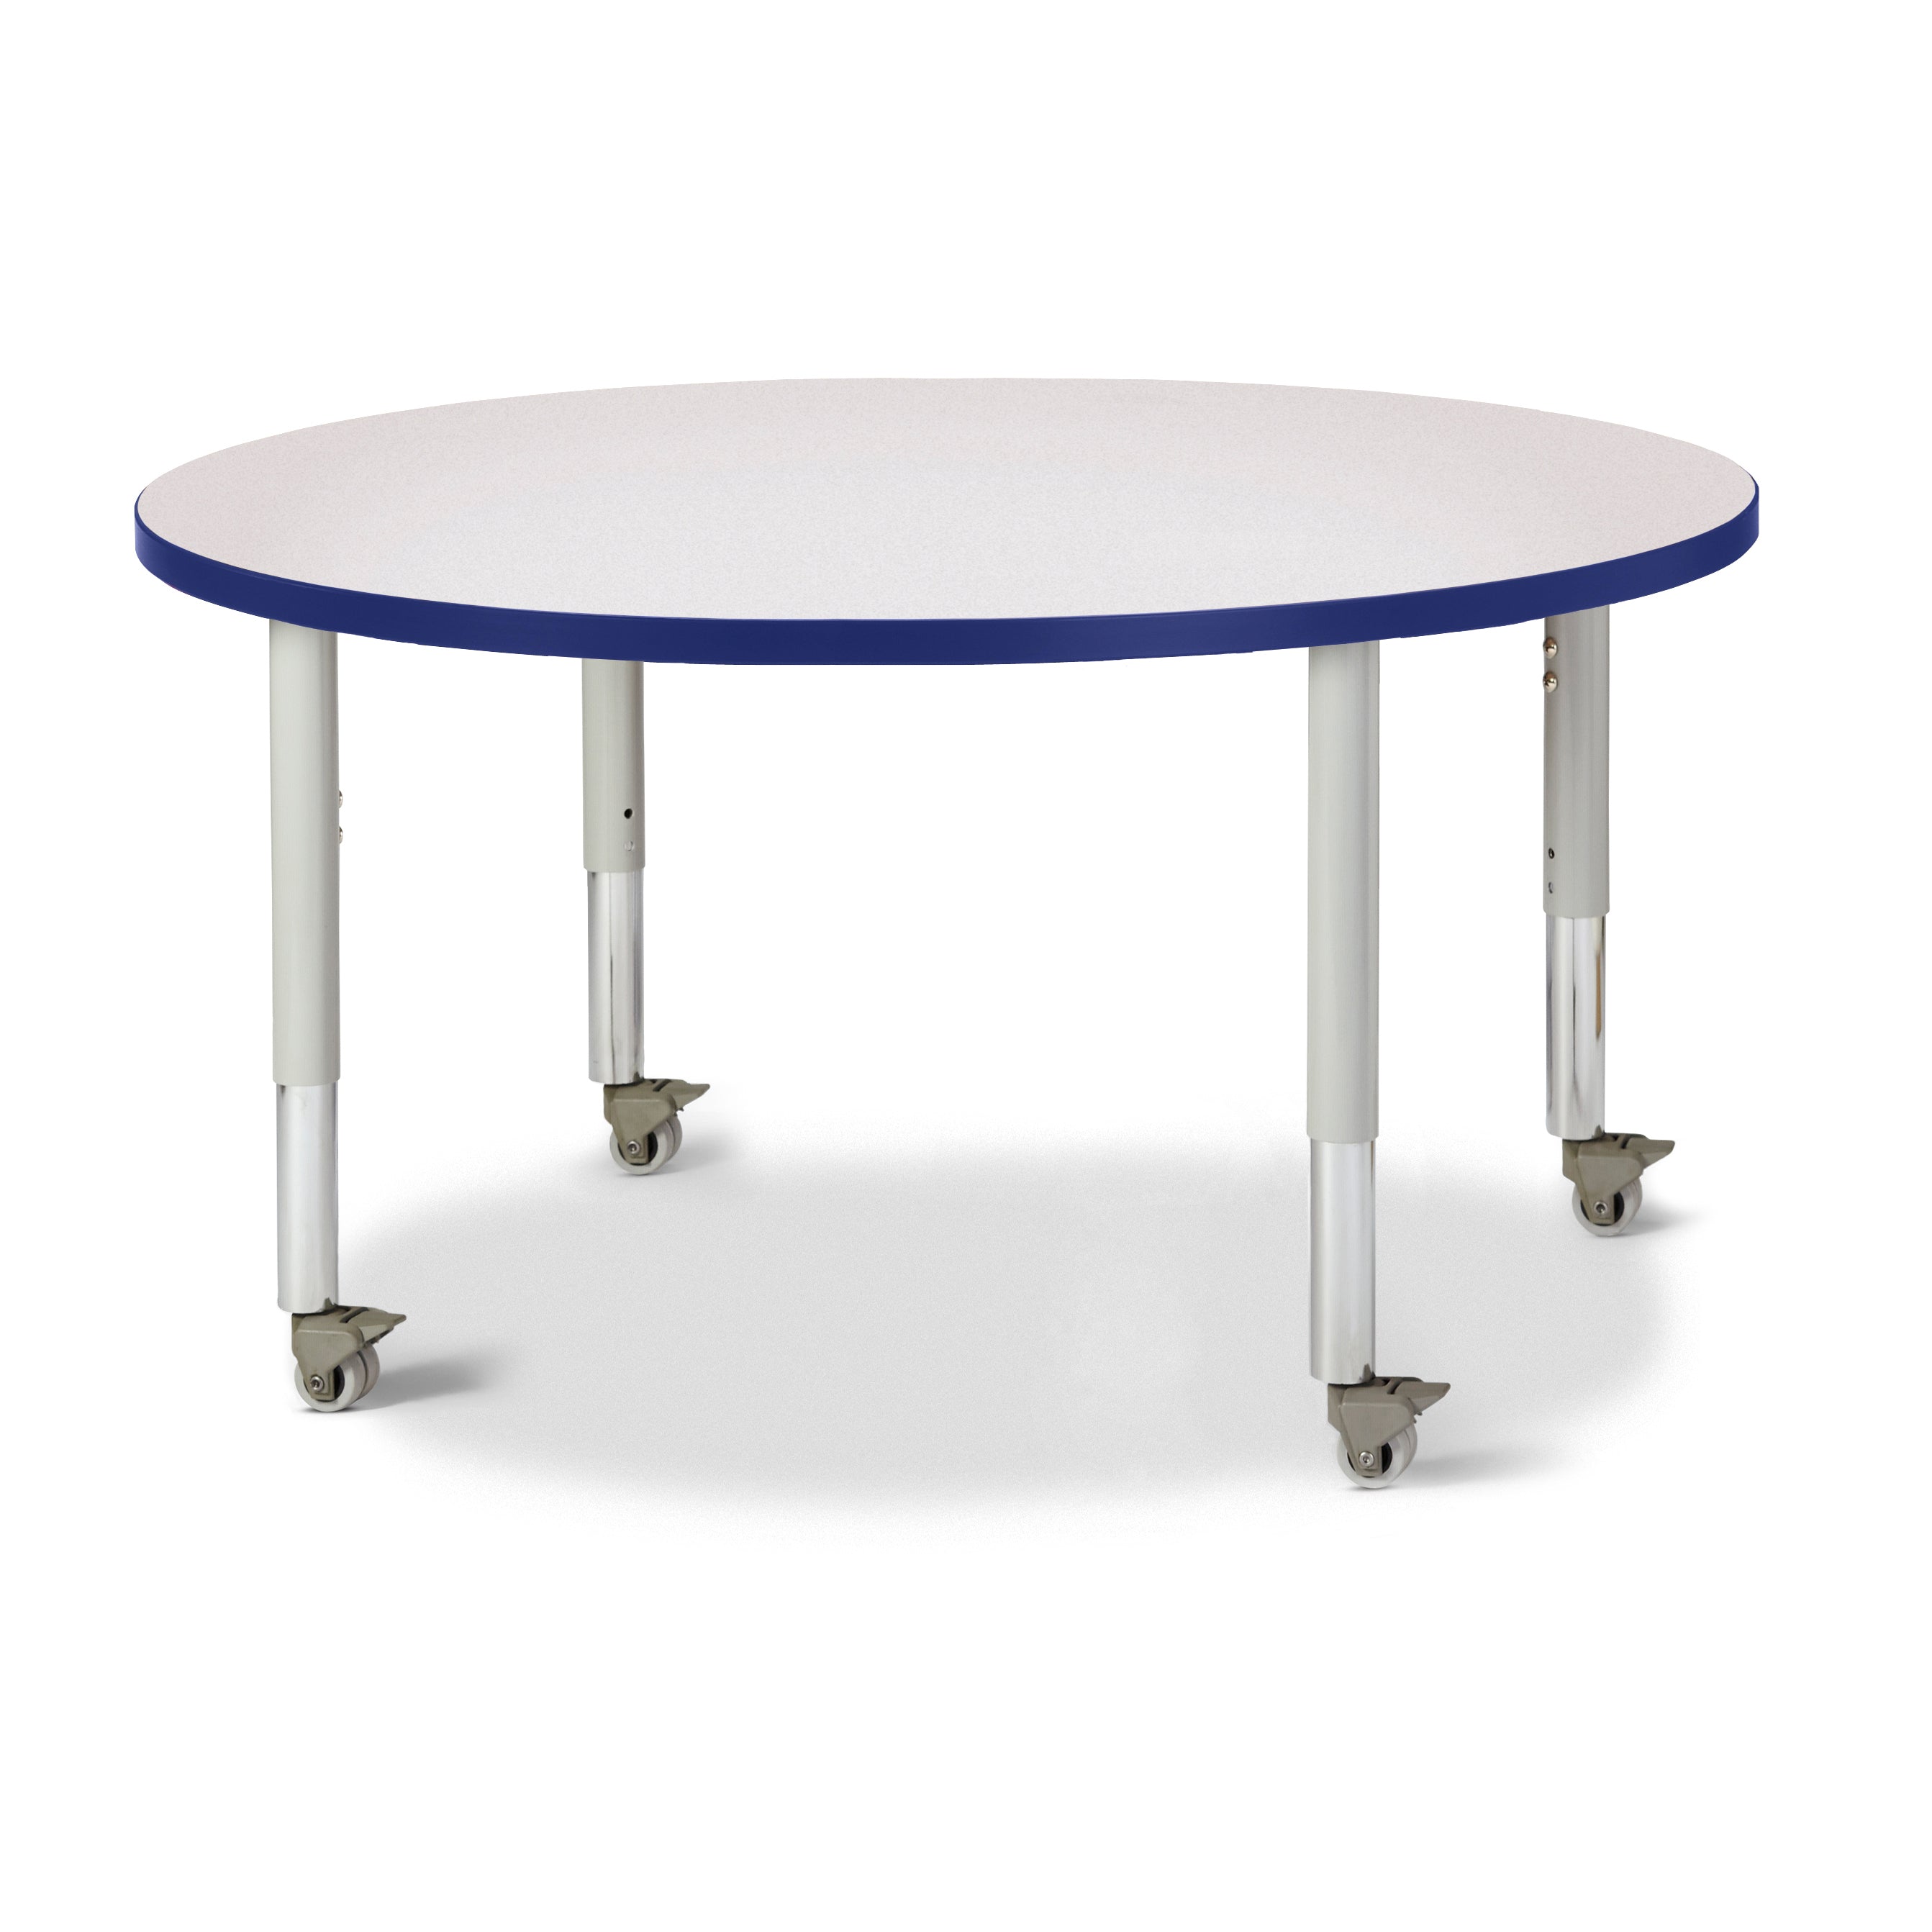 6468JCM003, Berries Round Activity Table - 42" Diameter, Mobile - Freckled Gray/Blue/Gray